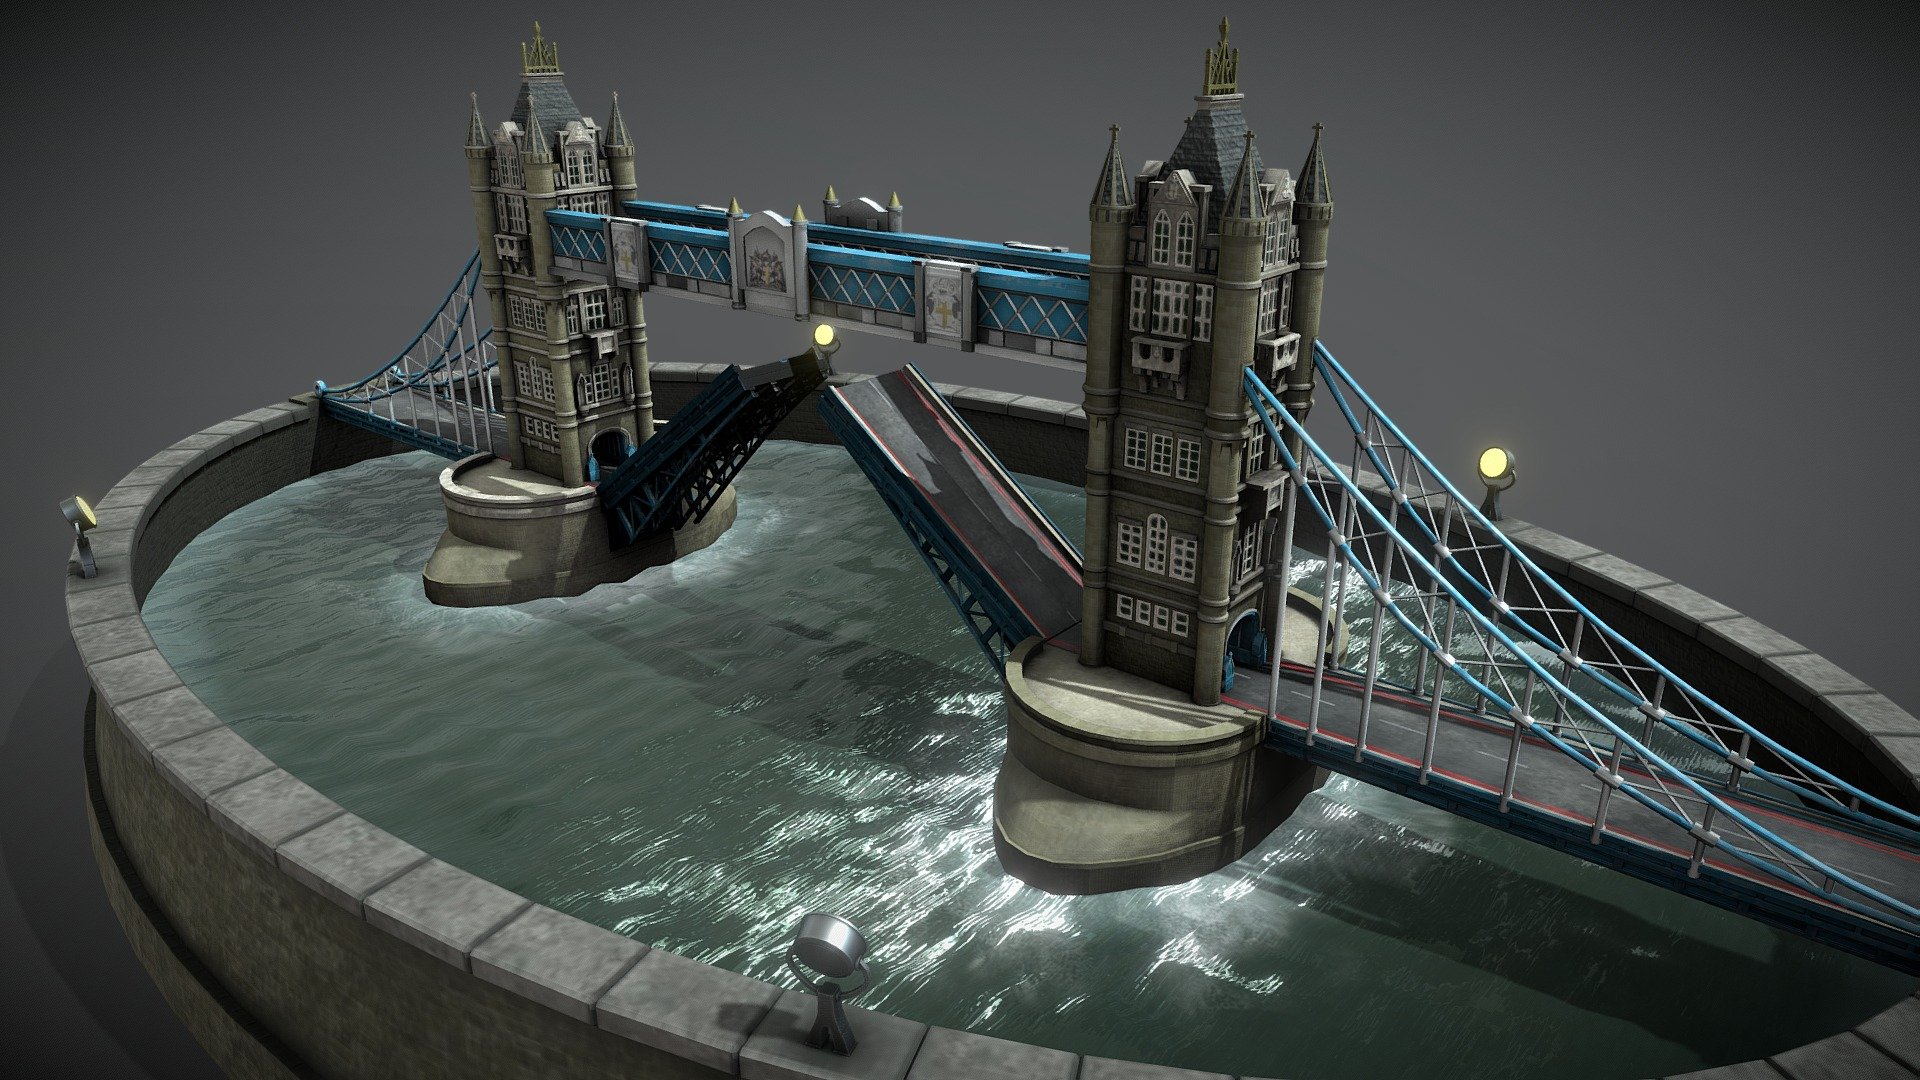 London Bridge Blender 3 to Unreal Engine 5 Complete Guide



Youtube complete Guide to this Model Link: https://youtu.be/8ClY3u3zpCg

This is the .blend file  that contains everything we created in our YouTube video.  This is a packed Blend file and has been cleaned up.  This makes sure there are no unnecessary files, materials, etc.  Everything in the .blend file is also organised into collections and named correctly.  This pack also contains all of the Unreal engine texture maps so you can build your project with these assets.  We have also included in this pack the Unreal Engine complete project.

All models you see in the thumbnail are fully textured

42 X Blender Textures Maps

1 X Packed Blend File

22 X UE5 Packed Texture Maps

1 X Unreal Engine 5 (Complete Project)

1 X HDRI Setup - London Bridge Blender 3 to Unreal Engine 5 Guide - Buy Royalty Free 3D model by 3D Tudor (@3DTudor) 3d model